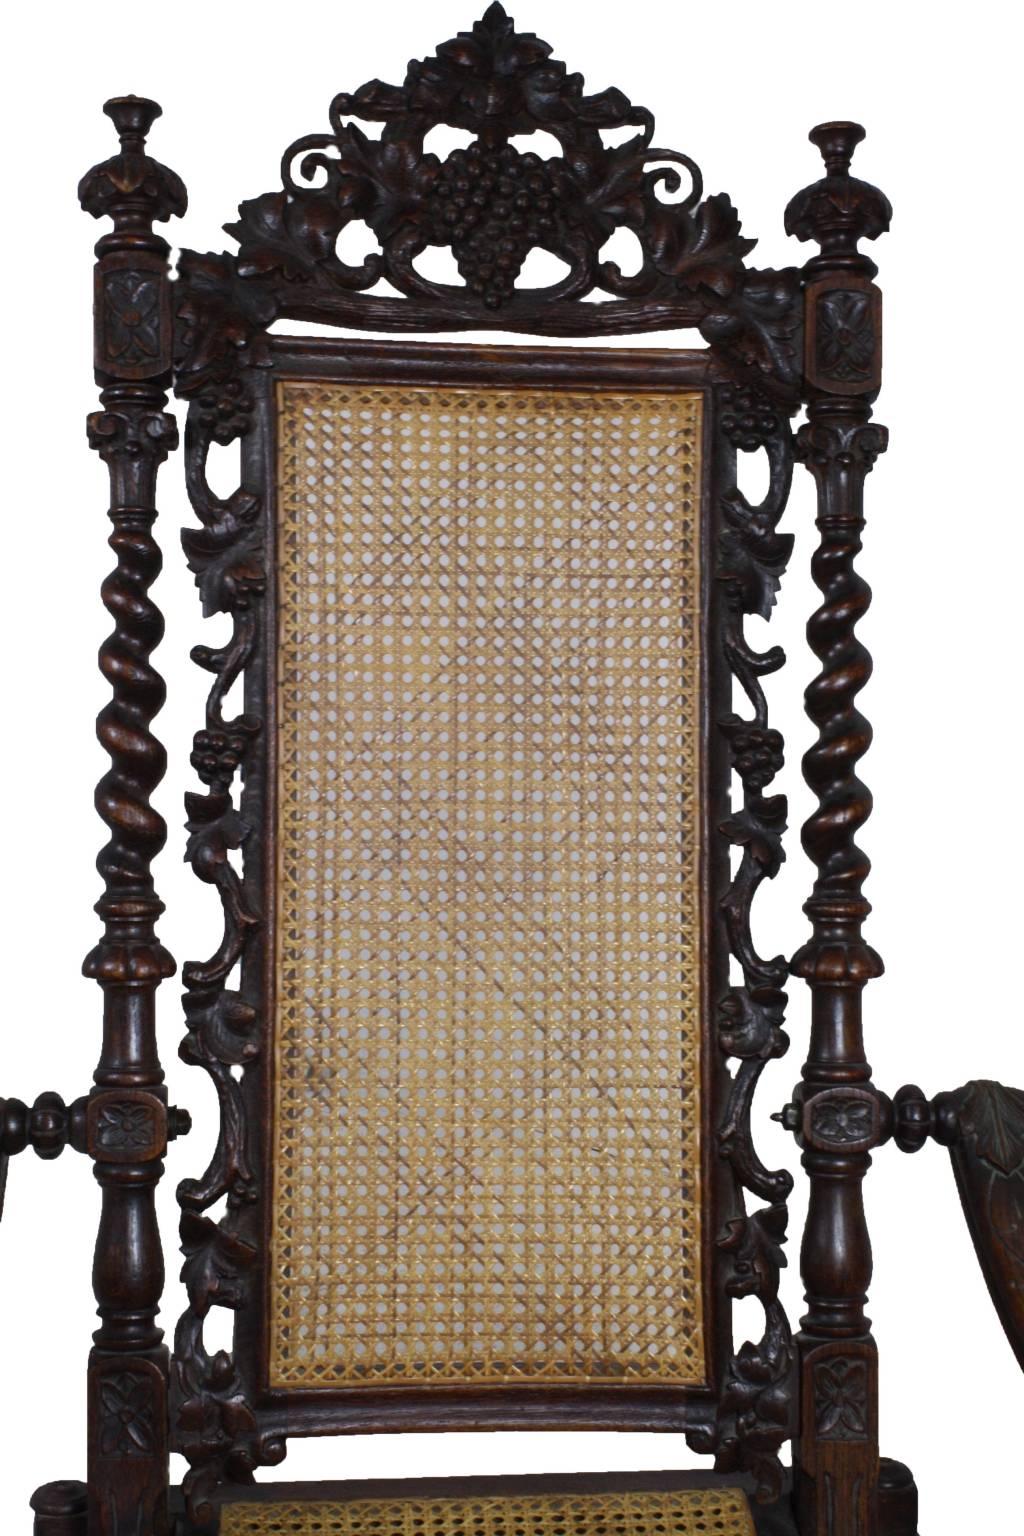 This rarely seen style of hunt chair has a unique folding design. It has a feel much like the folding lawn chairs or lounge chairs of today, with a high back and a low seat. The caned seat and back are in excellent shape, with ornate carvings